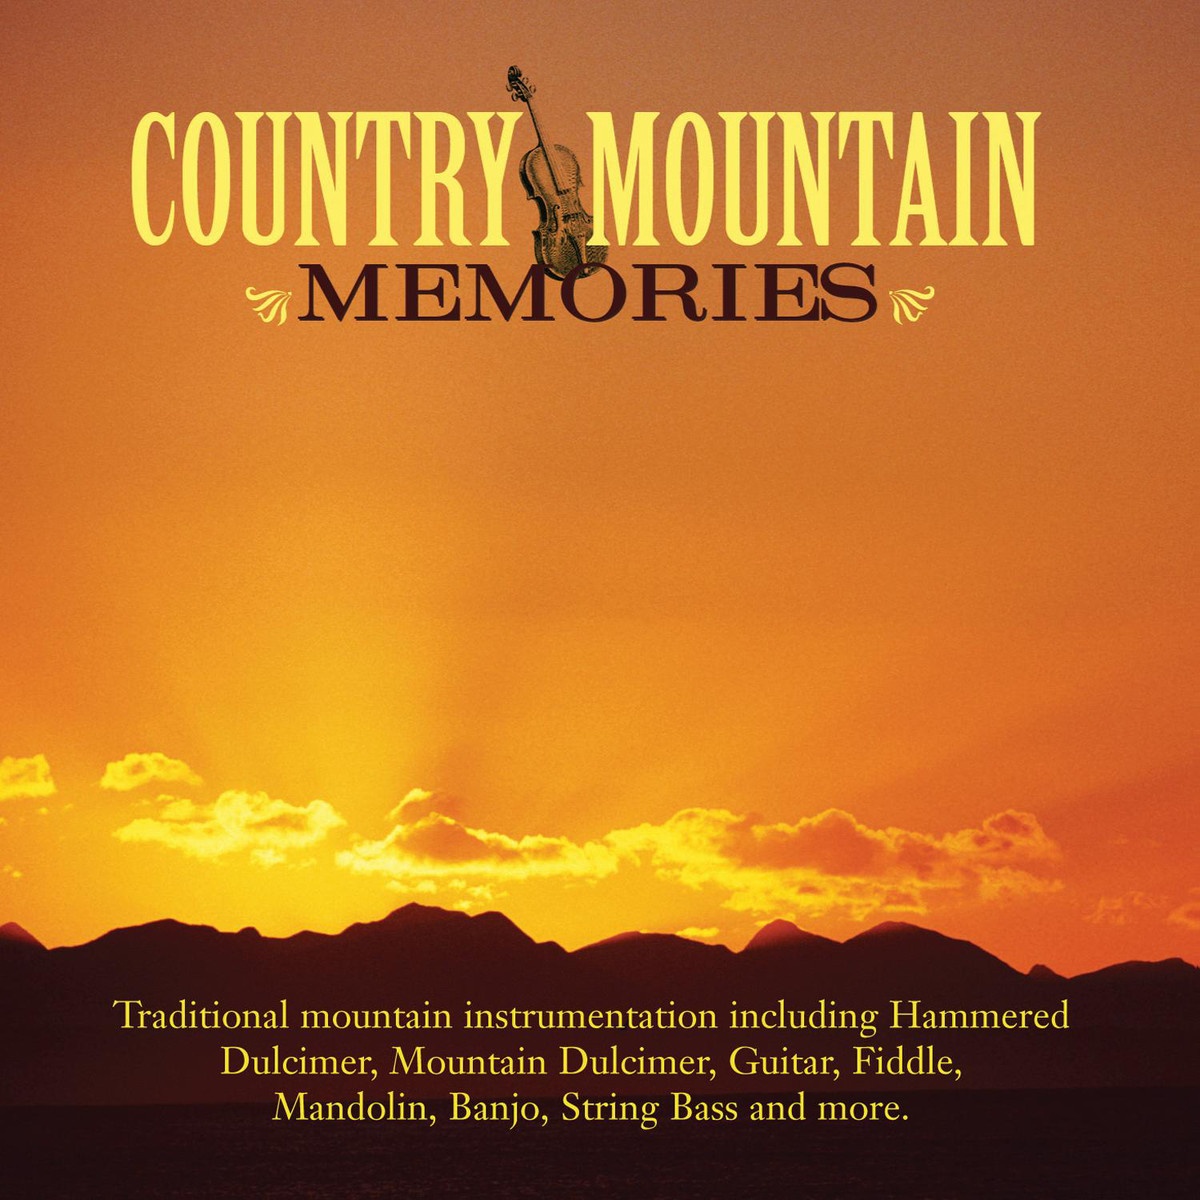 Keep On The Sunny Side Of Life (Country Mountain Memories album version)